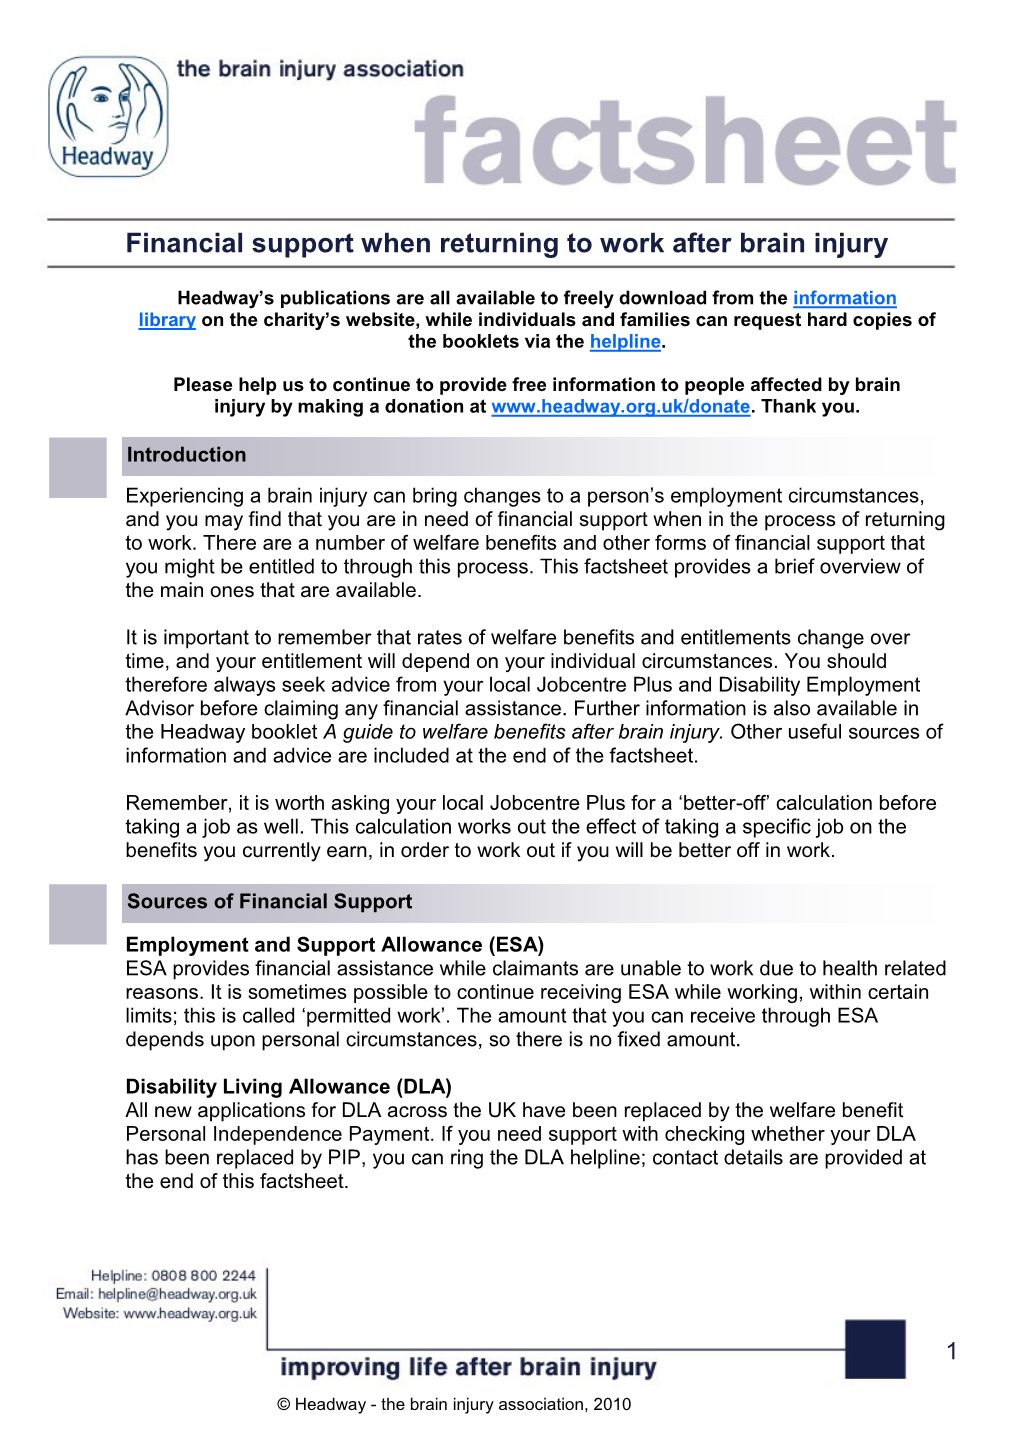 Financial Support When Returning to Work After Brain Injury